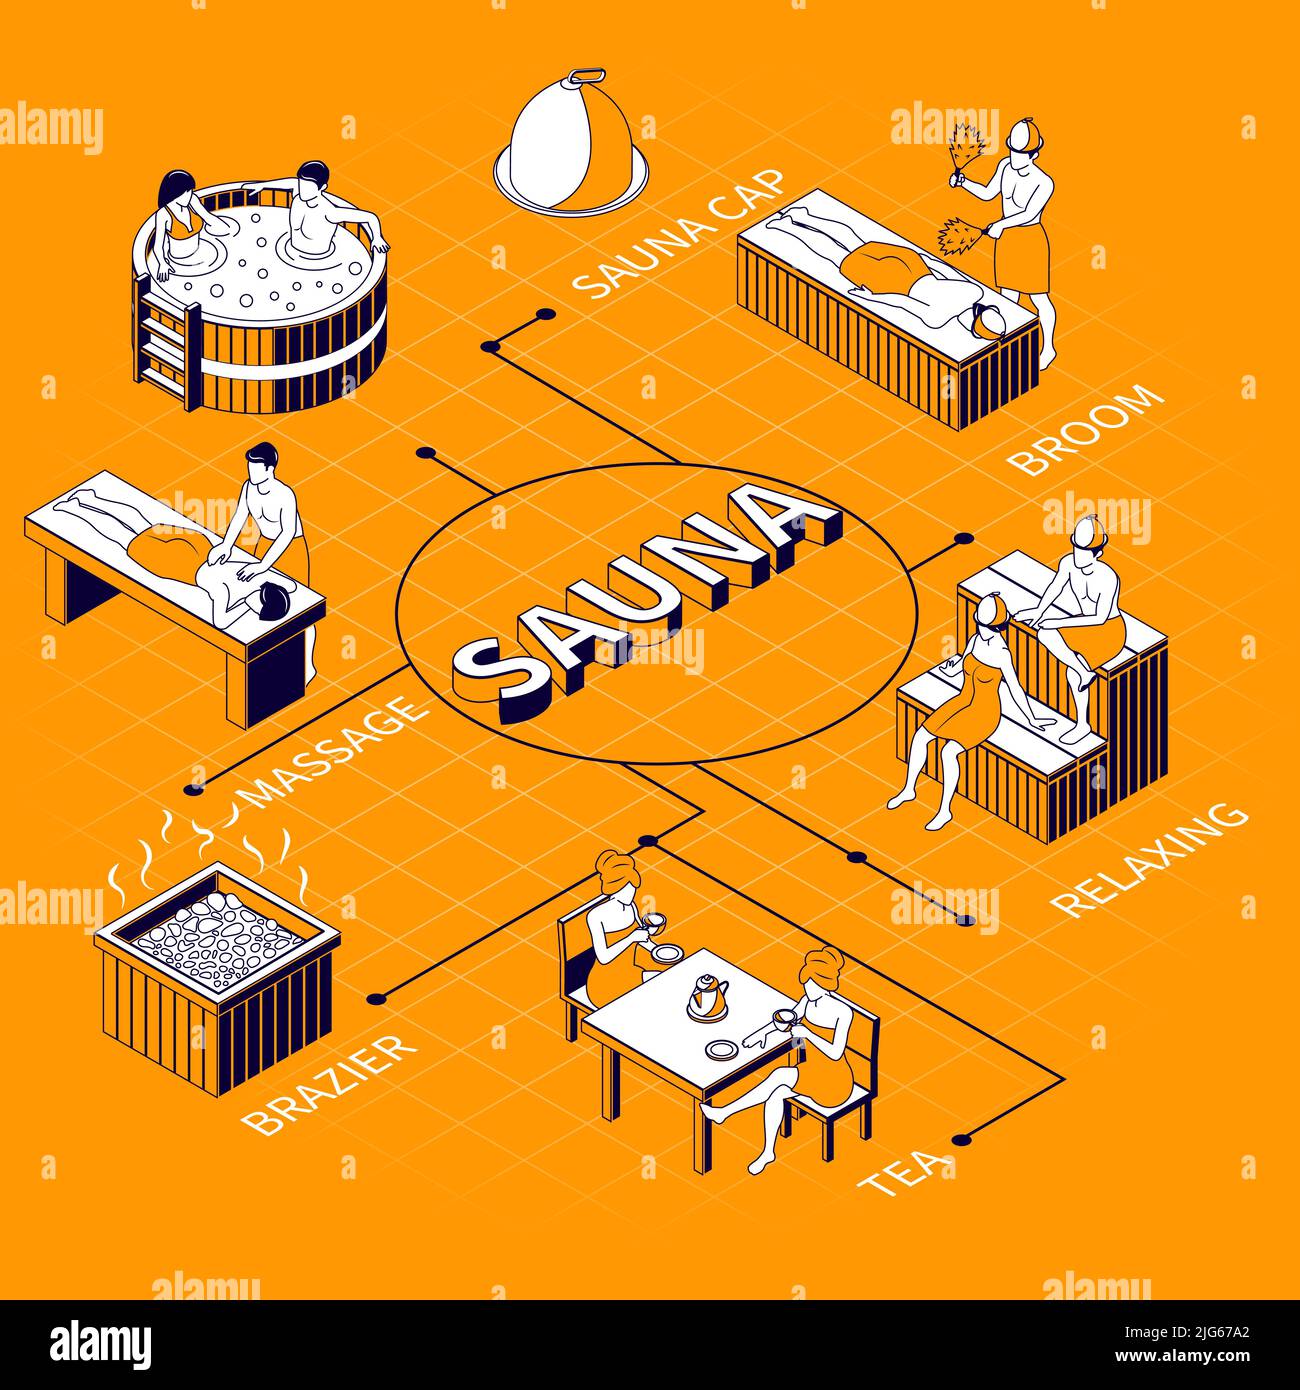 Sauna flowchart on yellow background illustrated relaxing in steam room steam bath with broom massage tea time isometric vector illustration Stock Vector